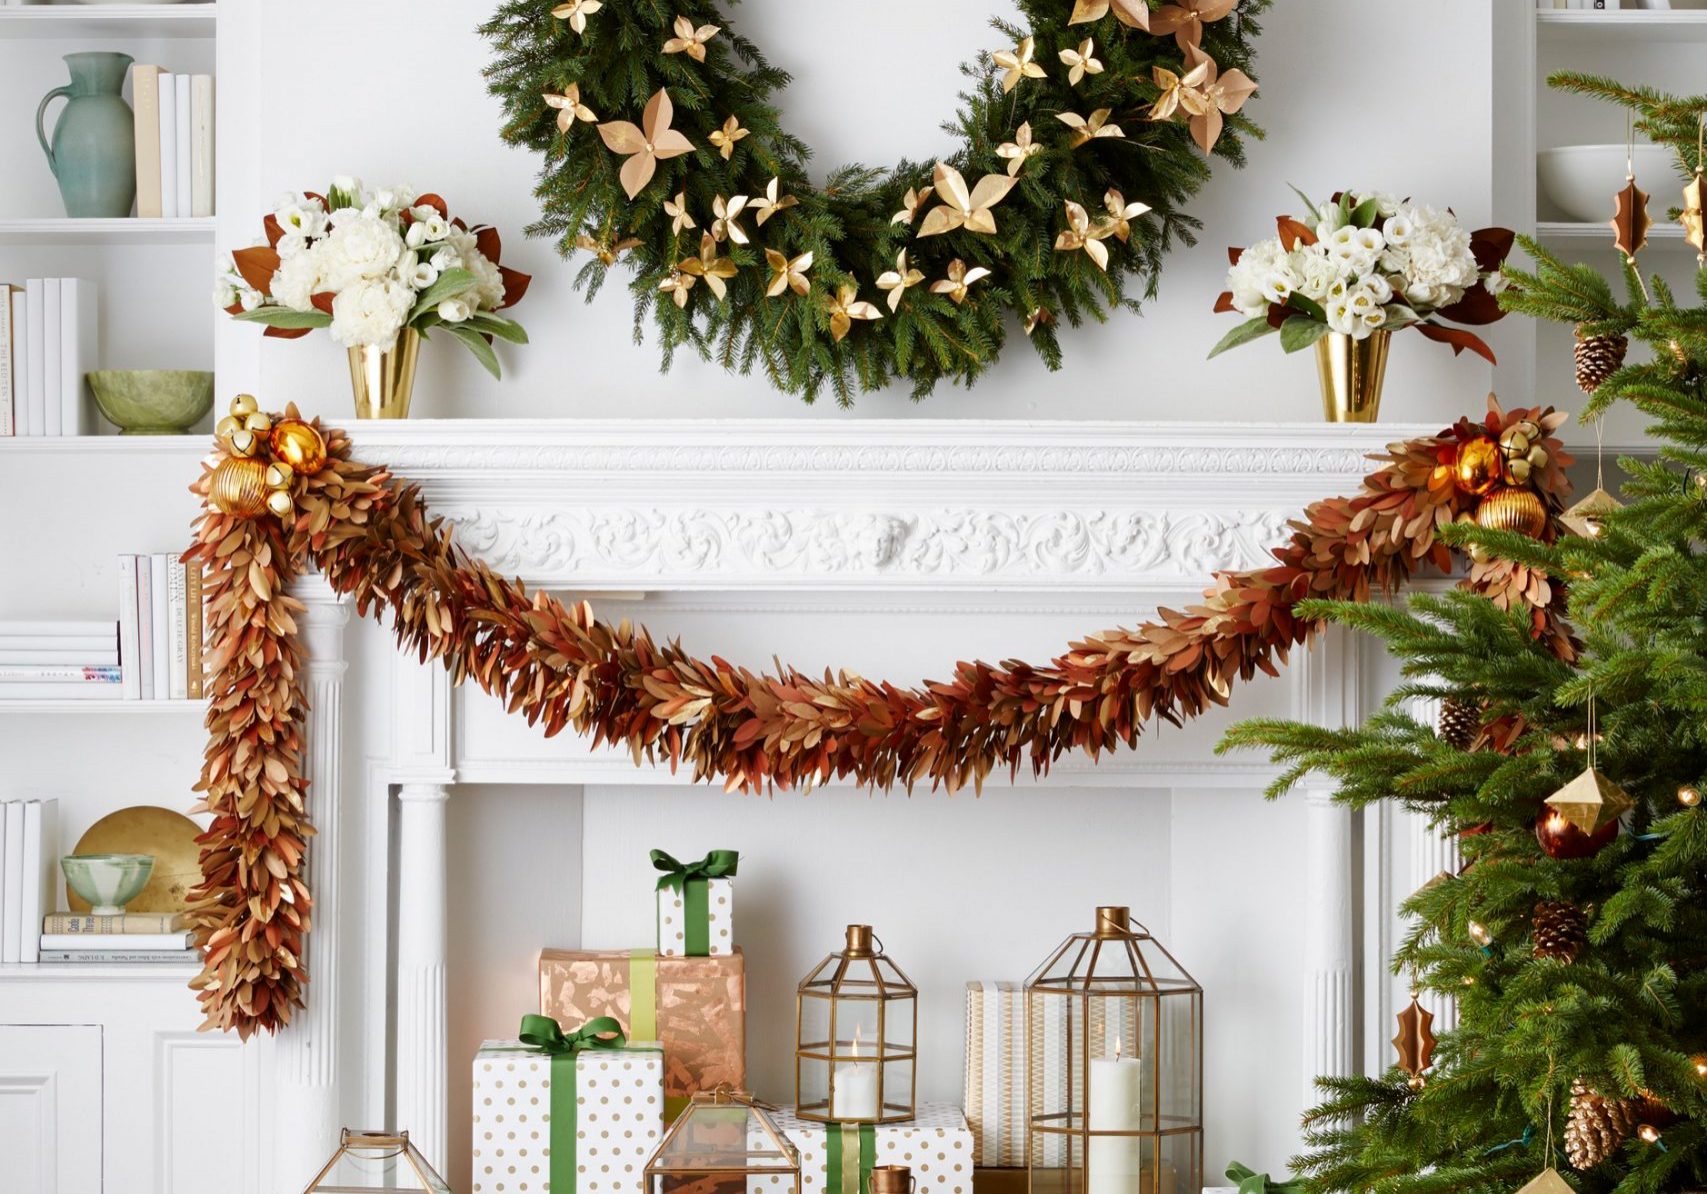 Bright Home interior decorated for holidays with wreath, presents and tree